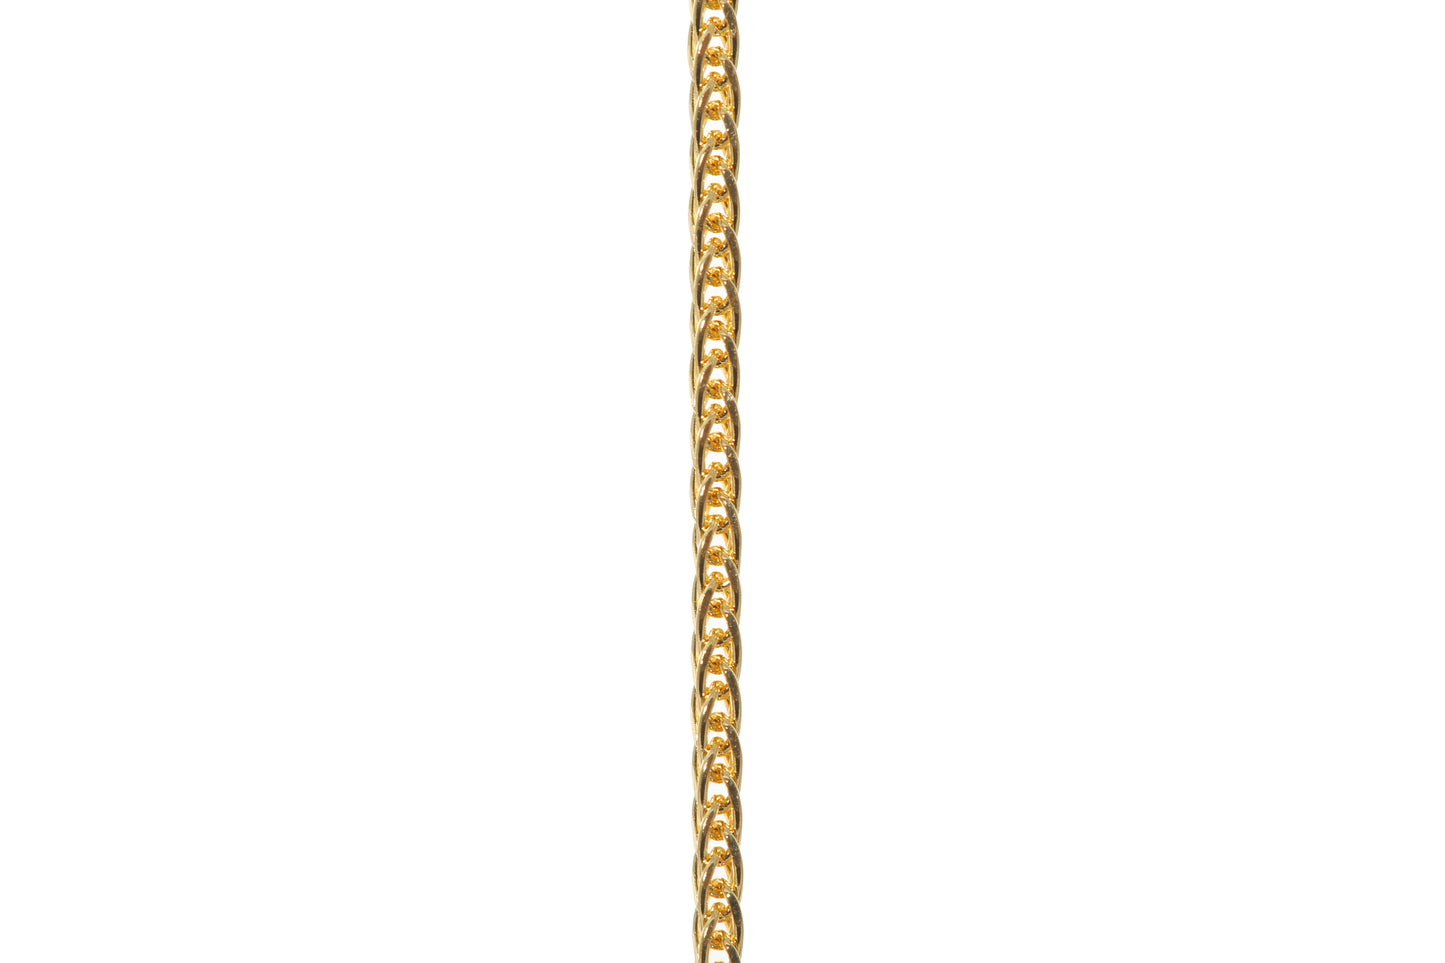 Wheat 24k Gold Chain 16 Inches